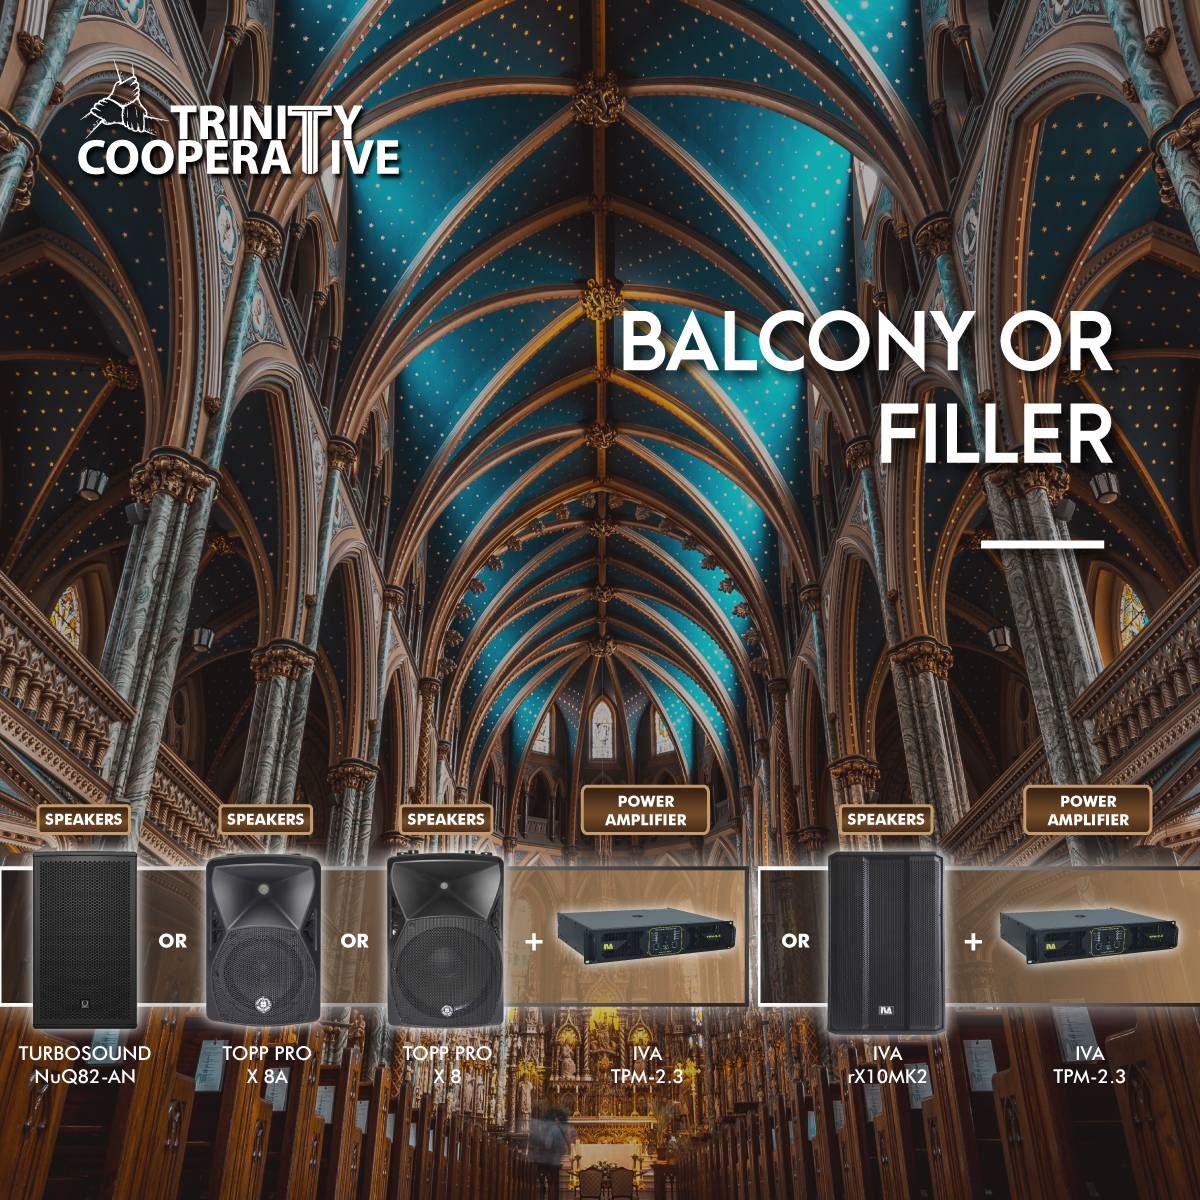 balcony-or-filler-pa-system-for-church-turbosound-nuq82-an-or-topp-x-8a-or-iva-rx-10mk2